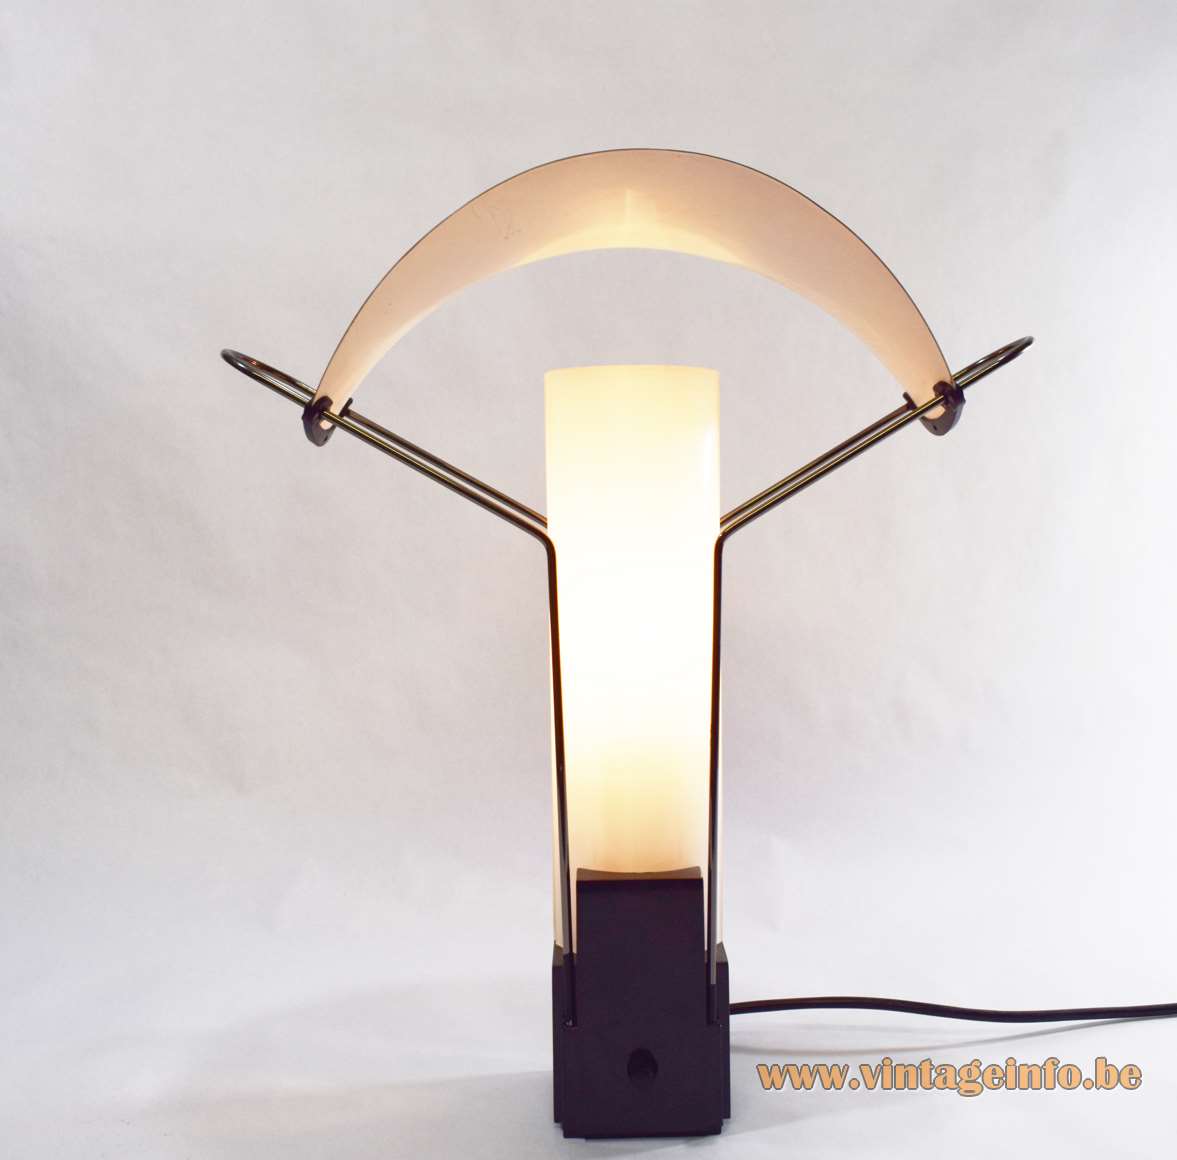 Arteluce Palio table lamp design: King & Miranda black square base curved opal glass diffusers copper lampshade